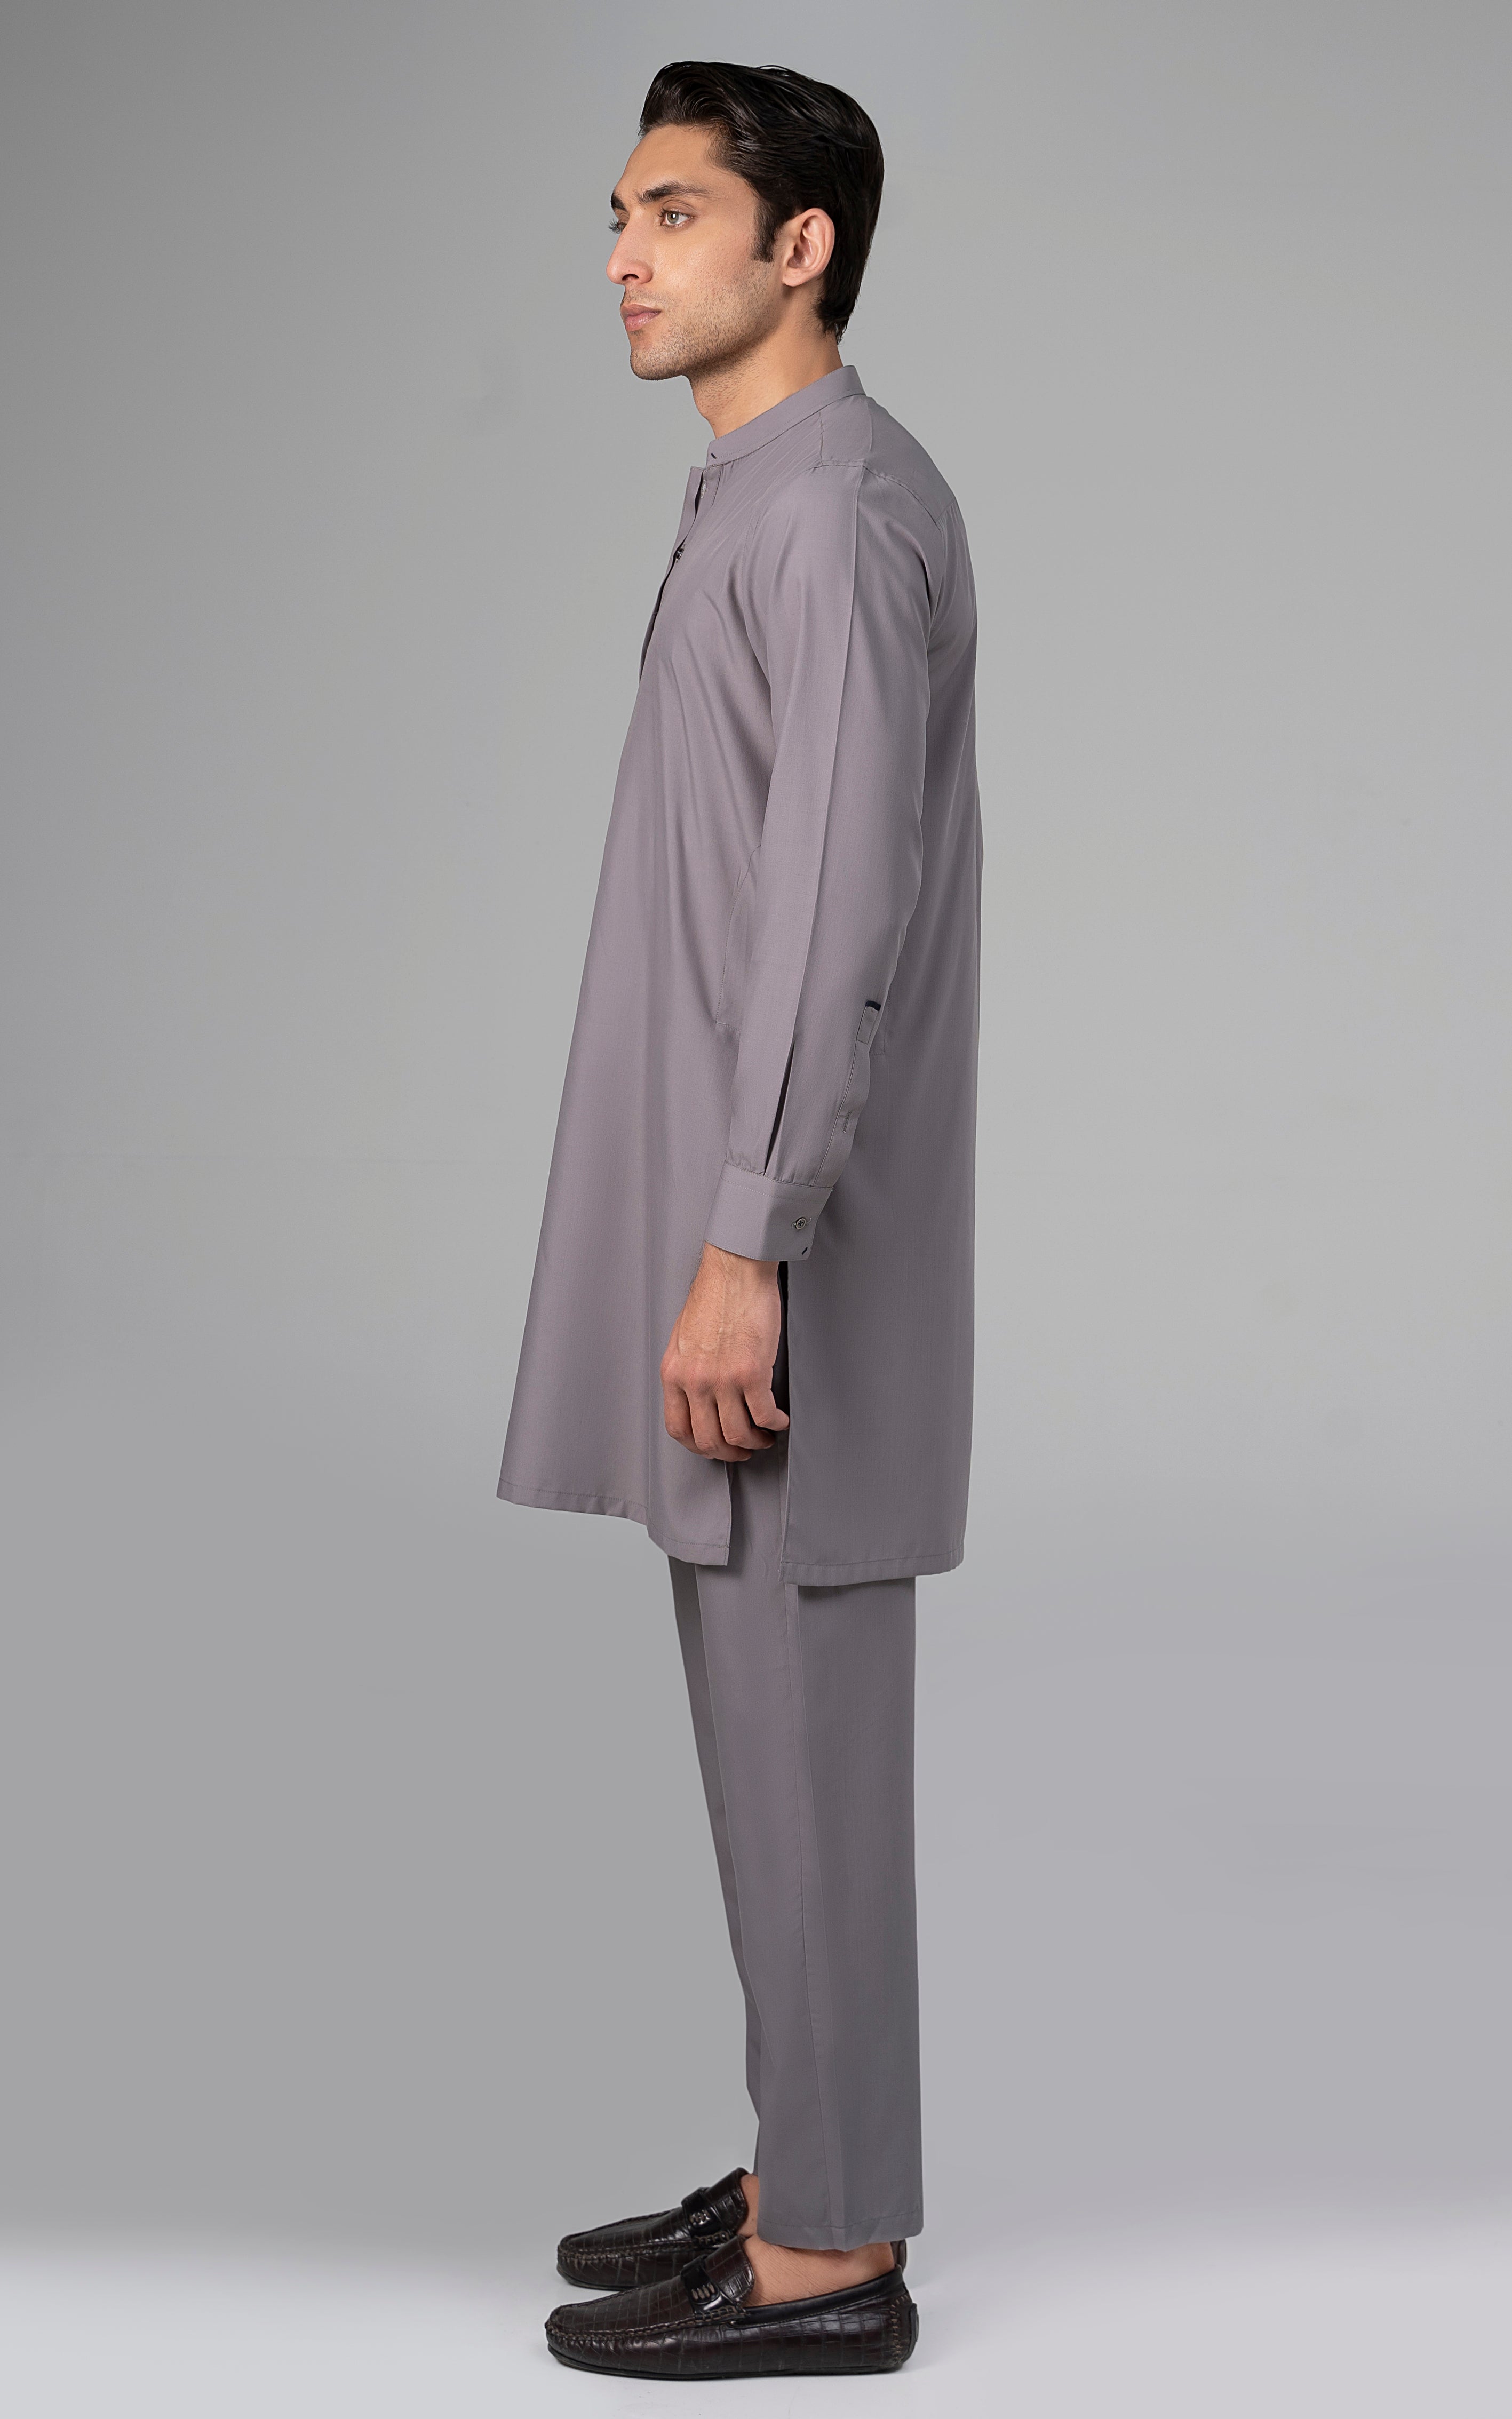 COTTON BLENDED - CLASSIC COLLECTION GREY